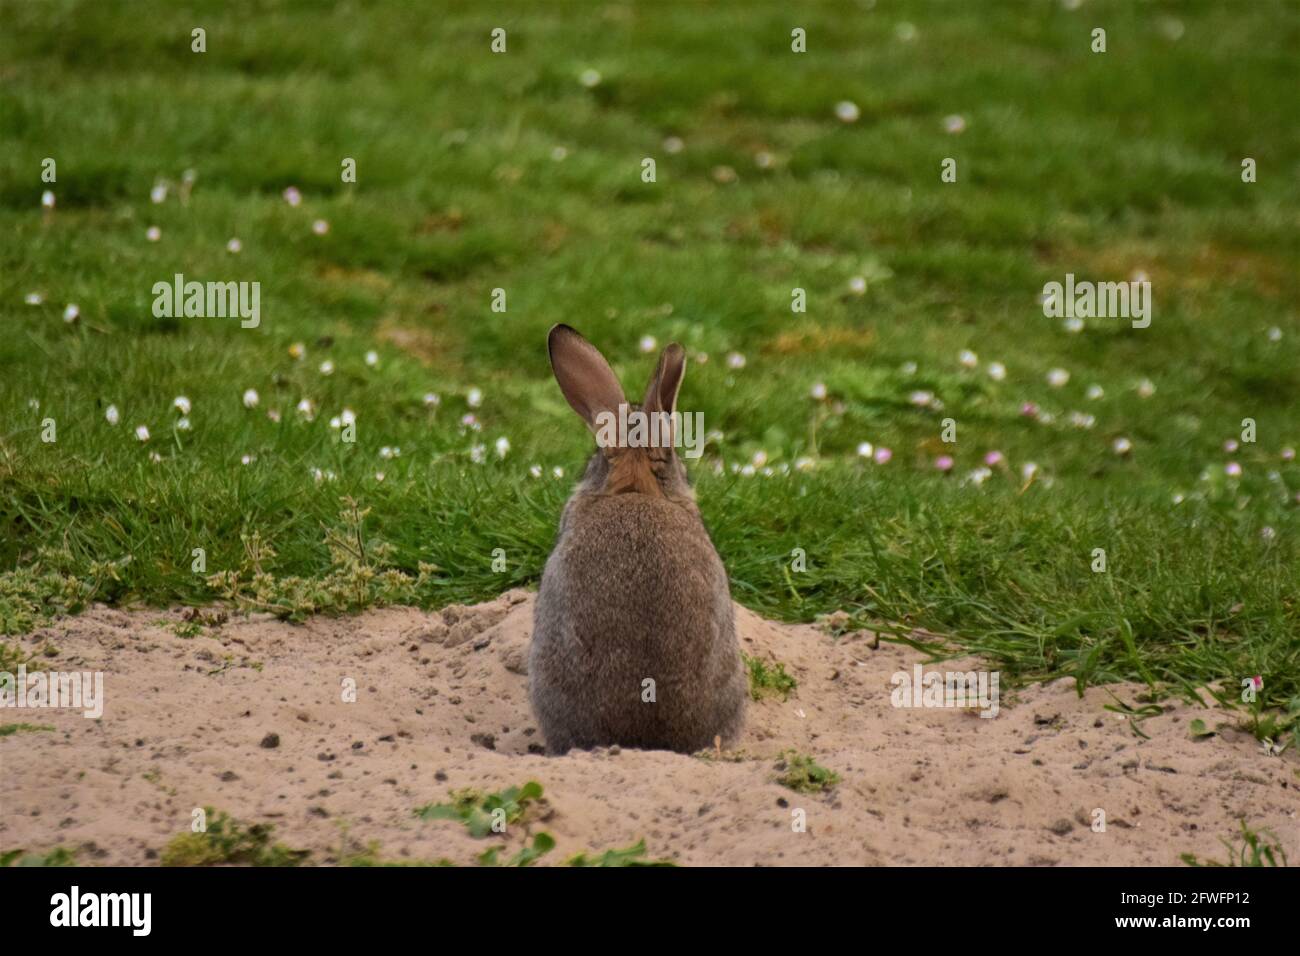 Brown rabbit sits on sand besides a green lawn Stock Photo